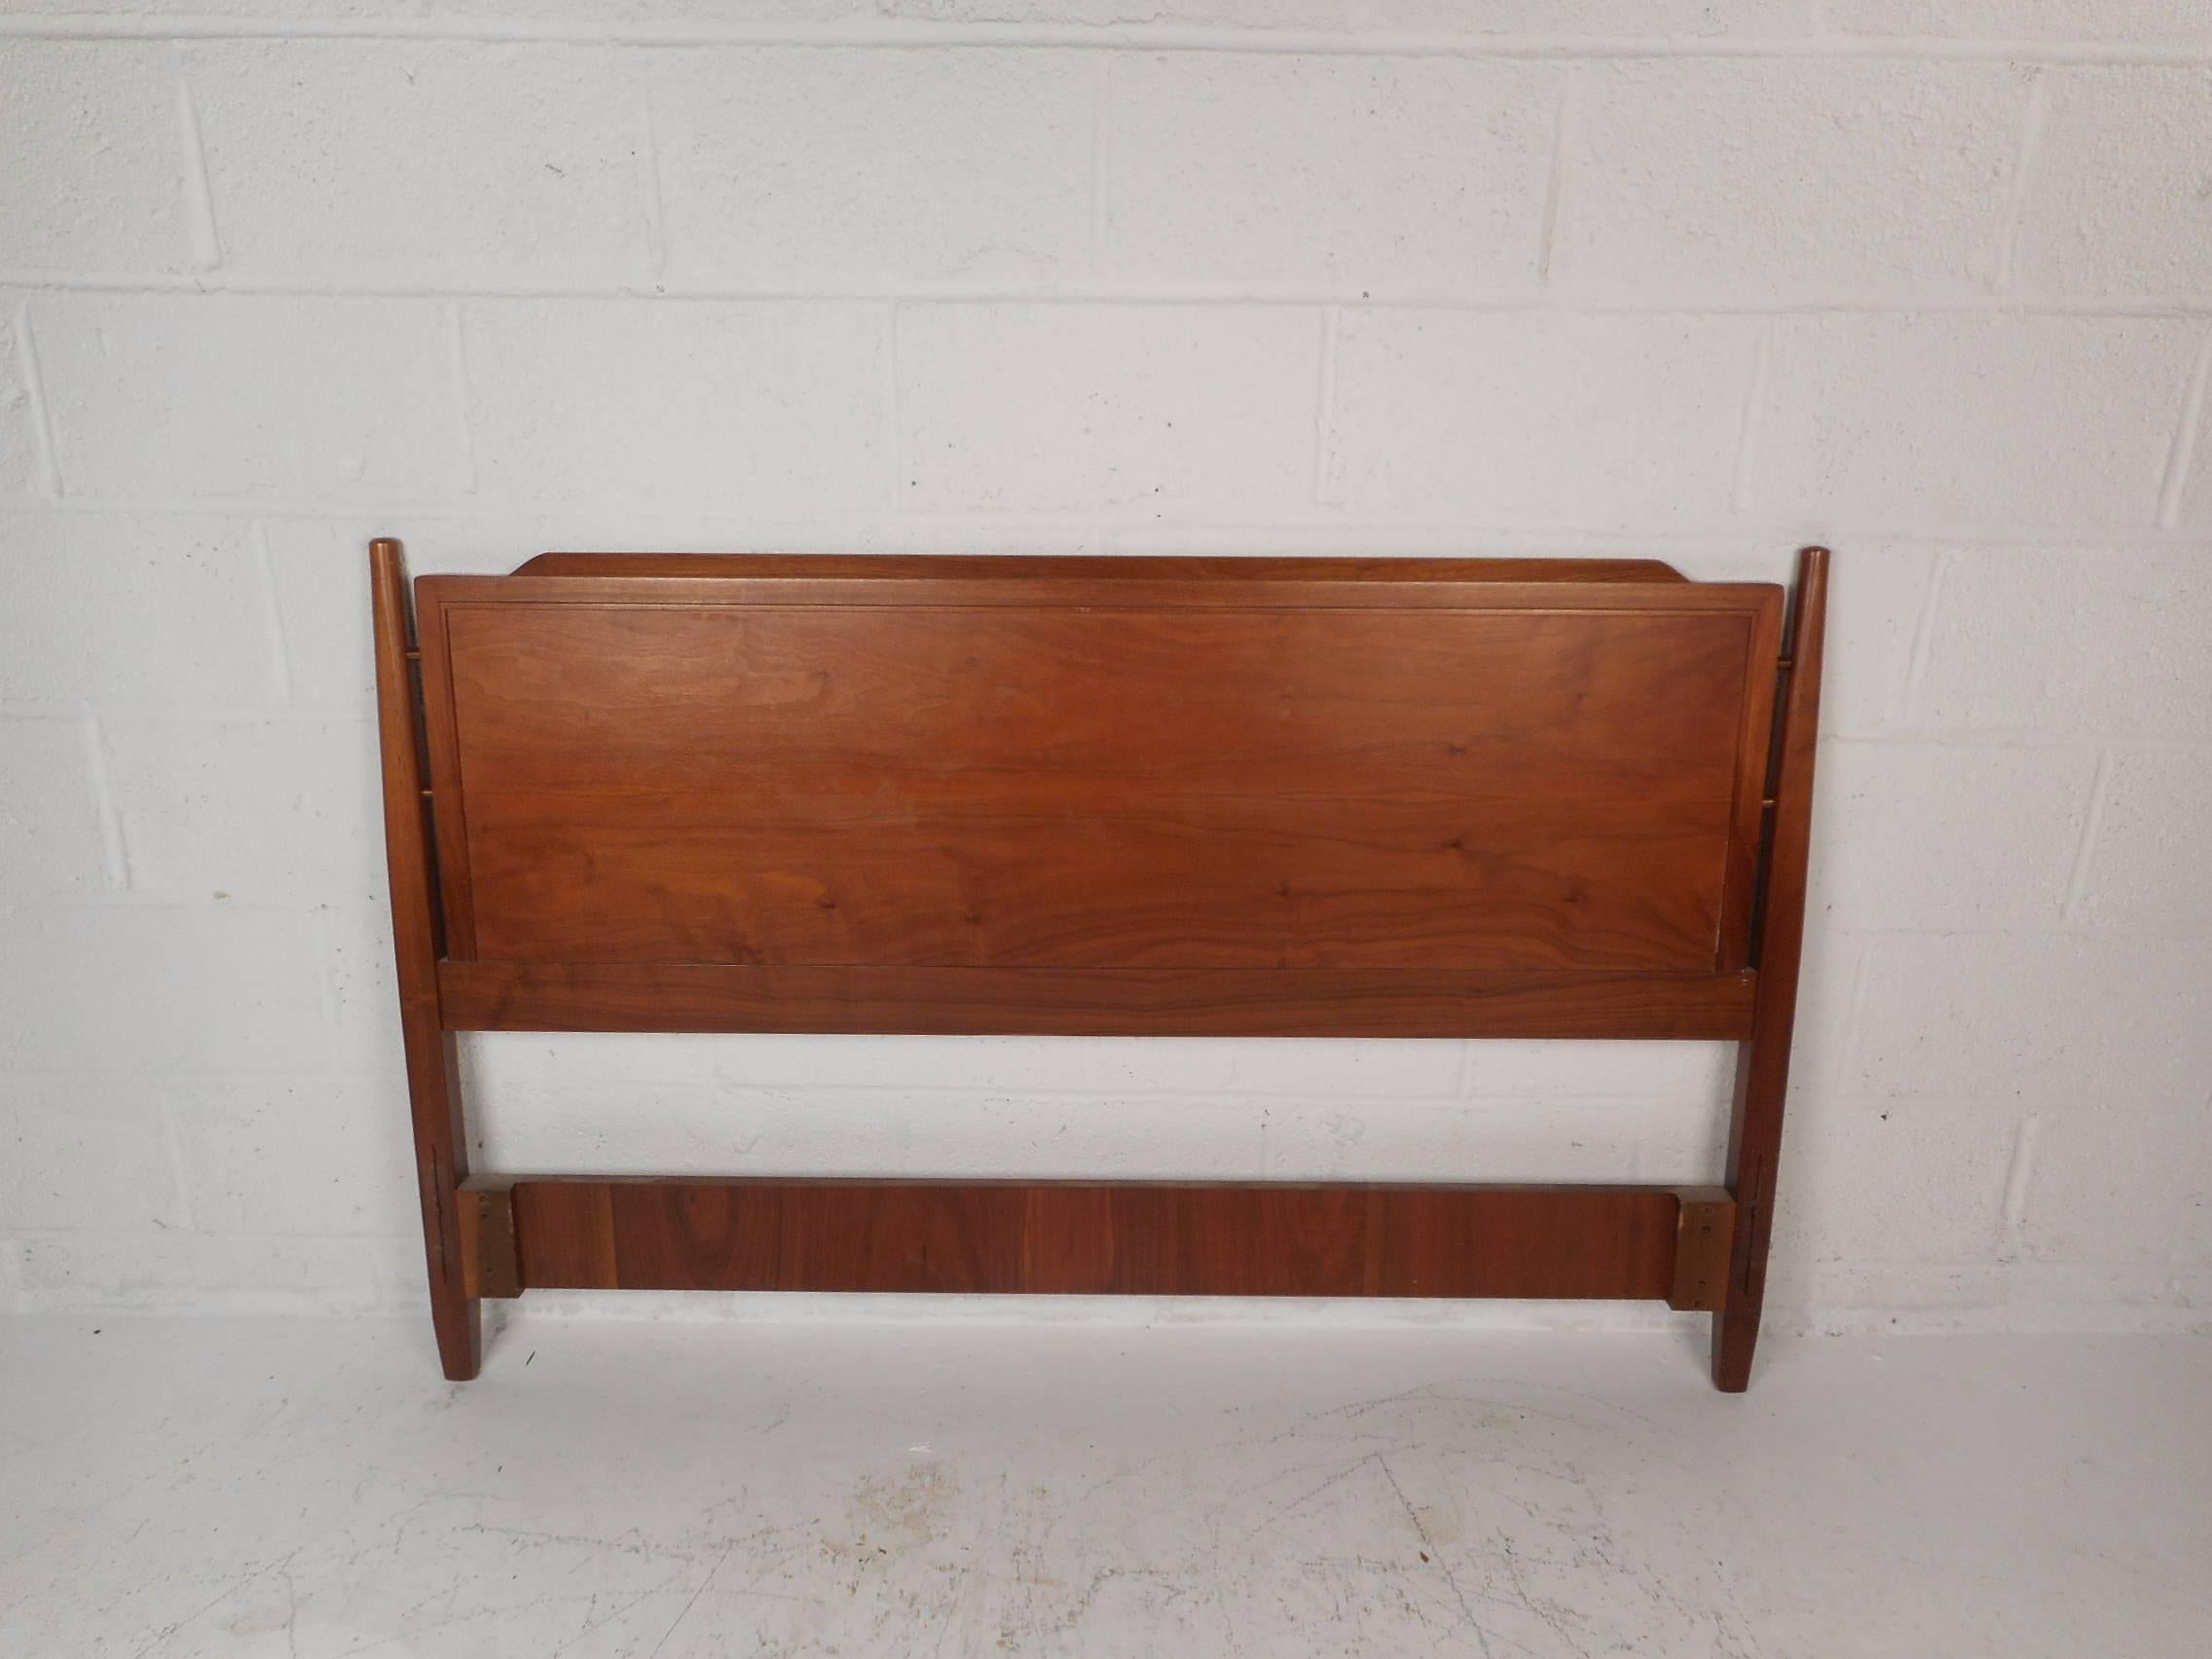 This beautiful vintage modern set includes a headboard, footboard, and stretchers. Sculpted design with unique tapered legs and elegant walnut wood grain throughout. This bed frame measures out at 56 inches wide and 79 inches deep. Please confirm